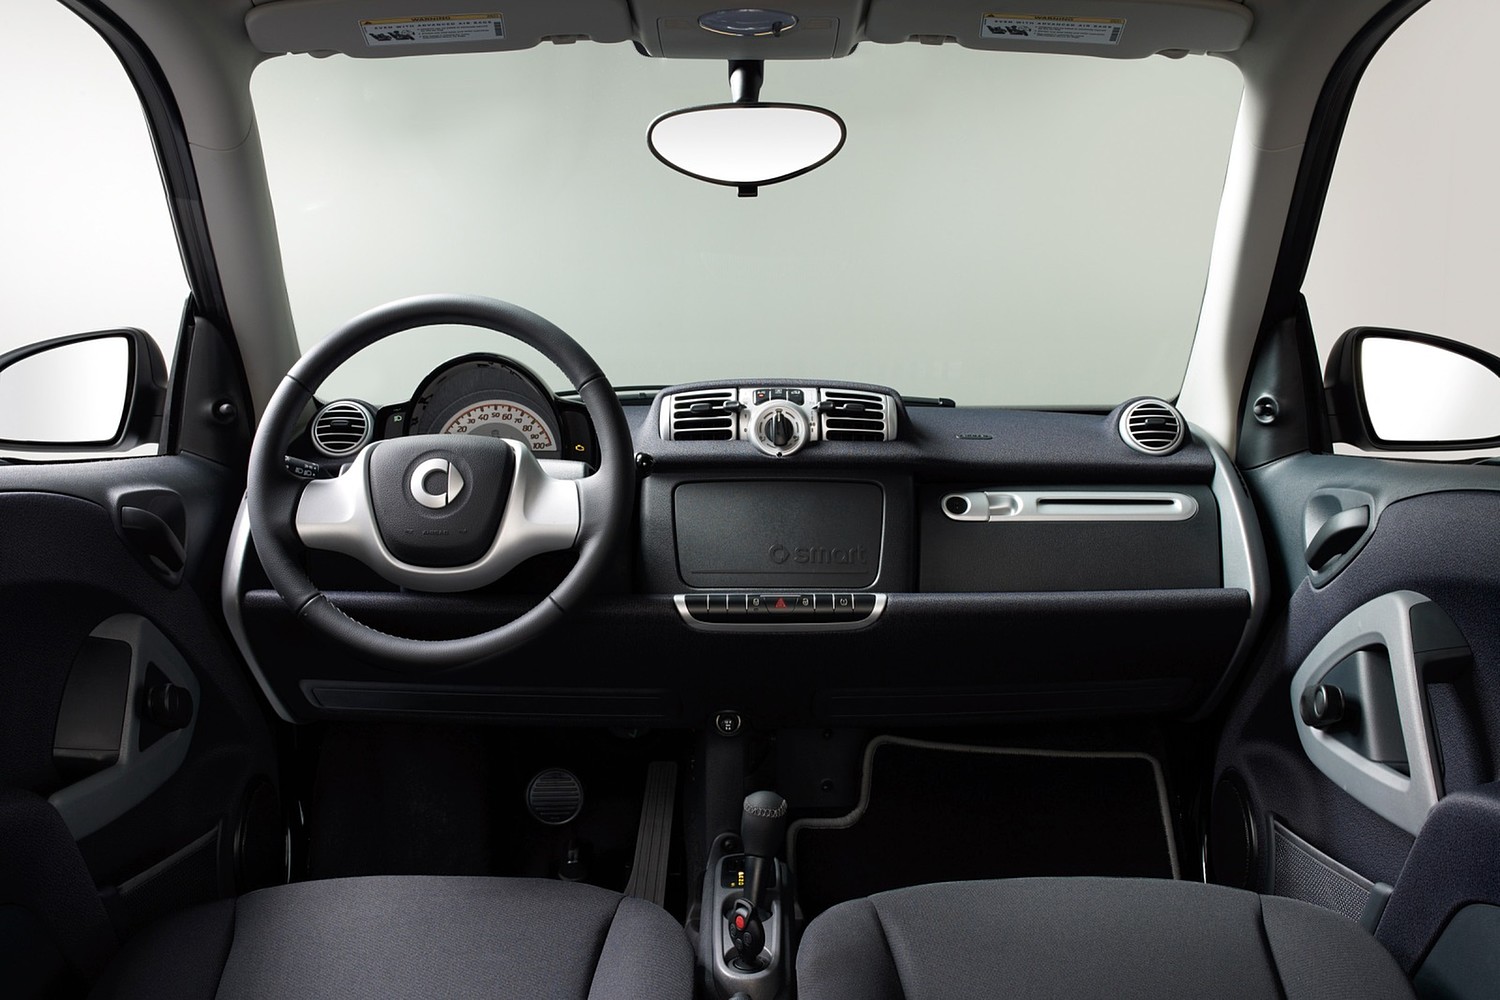 smart fortwo pure coupe 2dr Hatchback Dashboard (2013 model year shown)